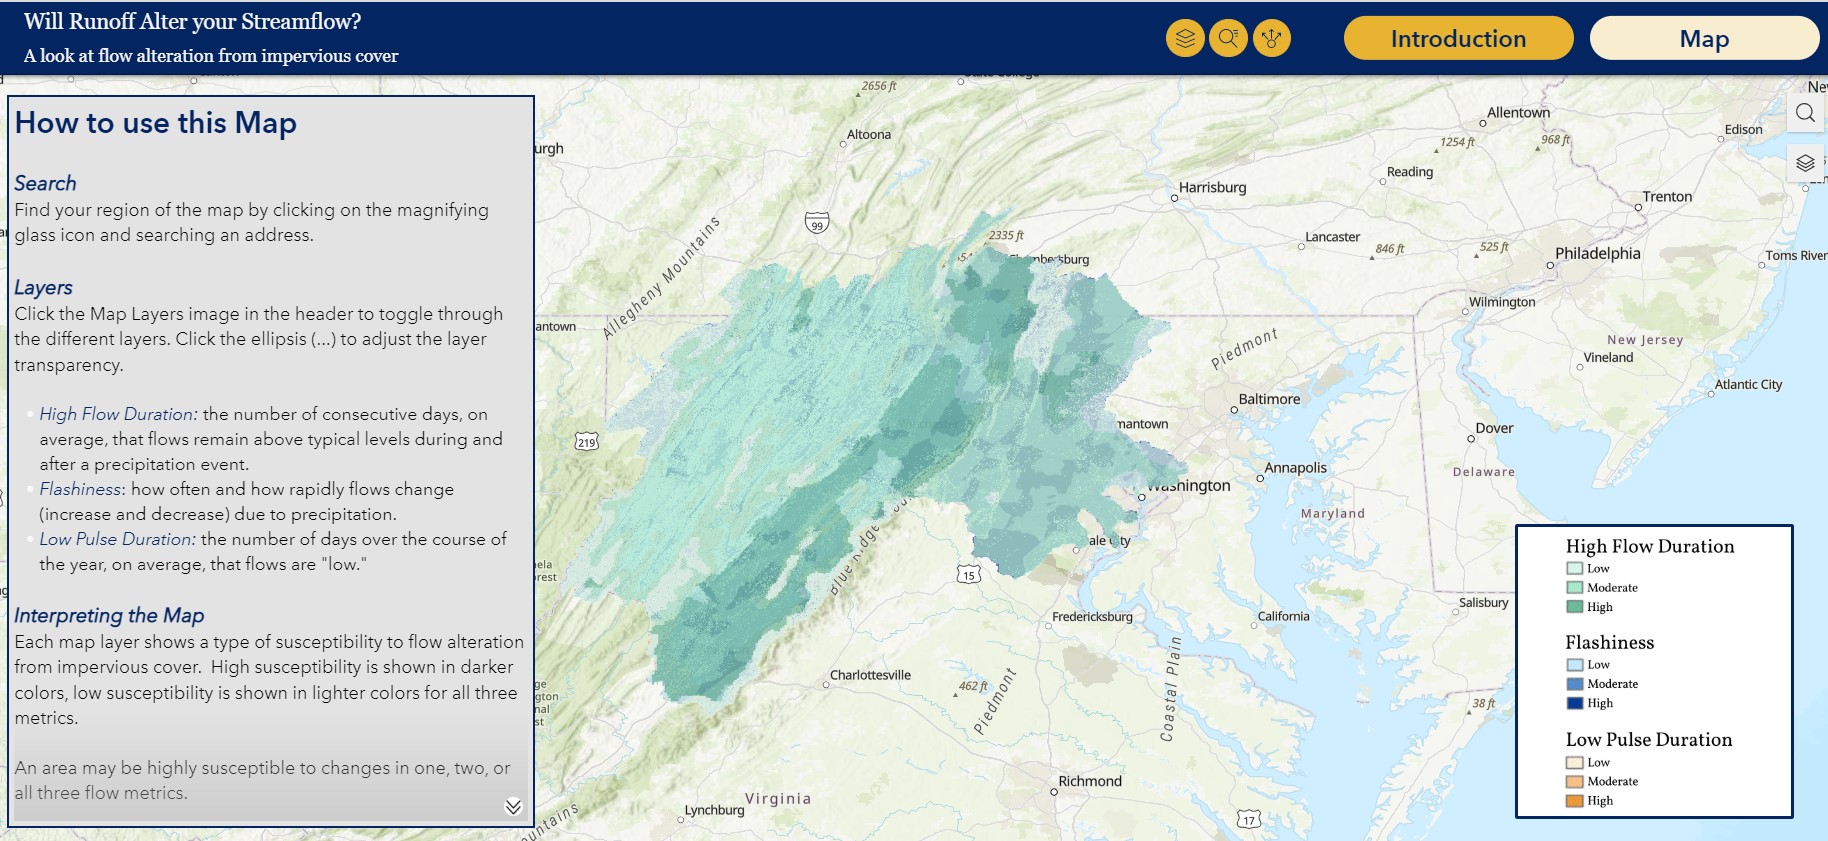 Screenshot of the map Will Runoff Alter your Streamflow.